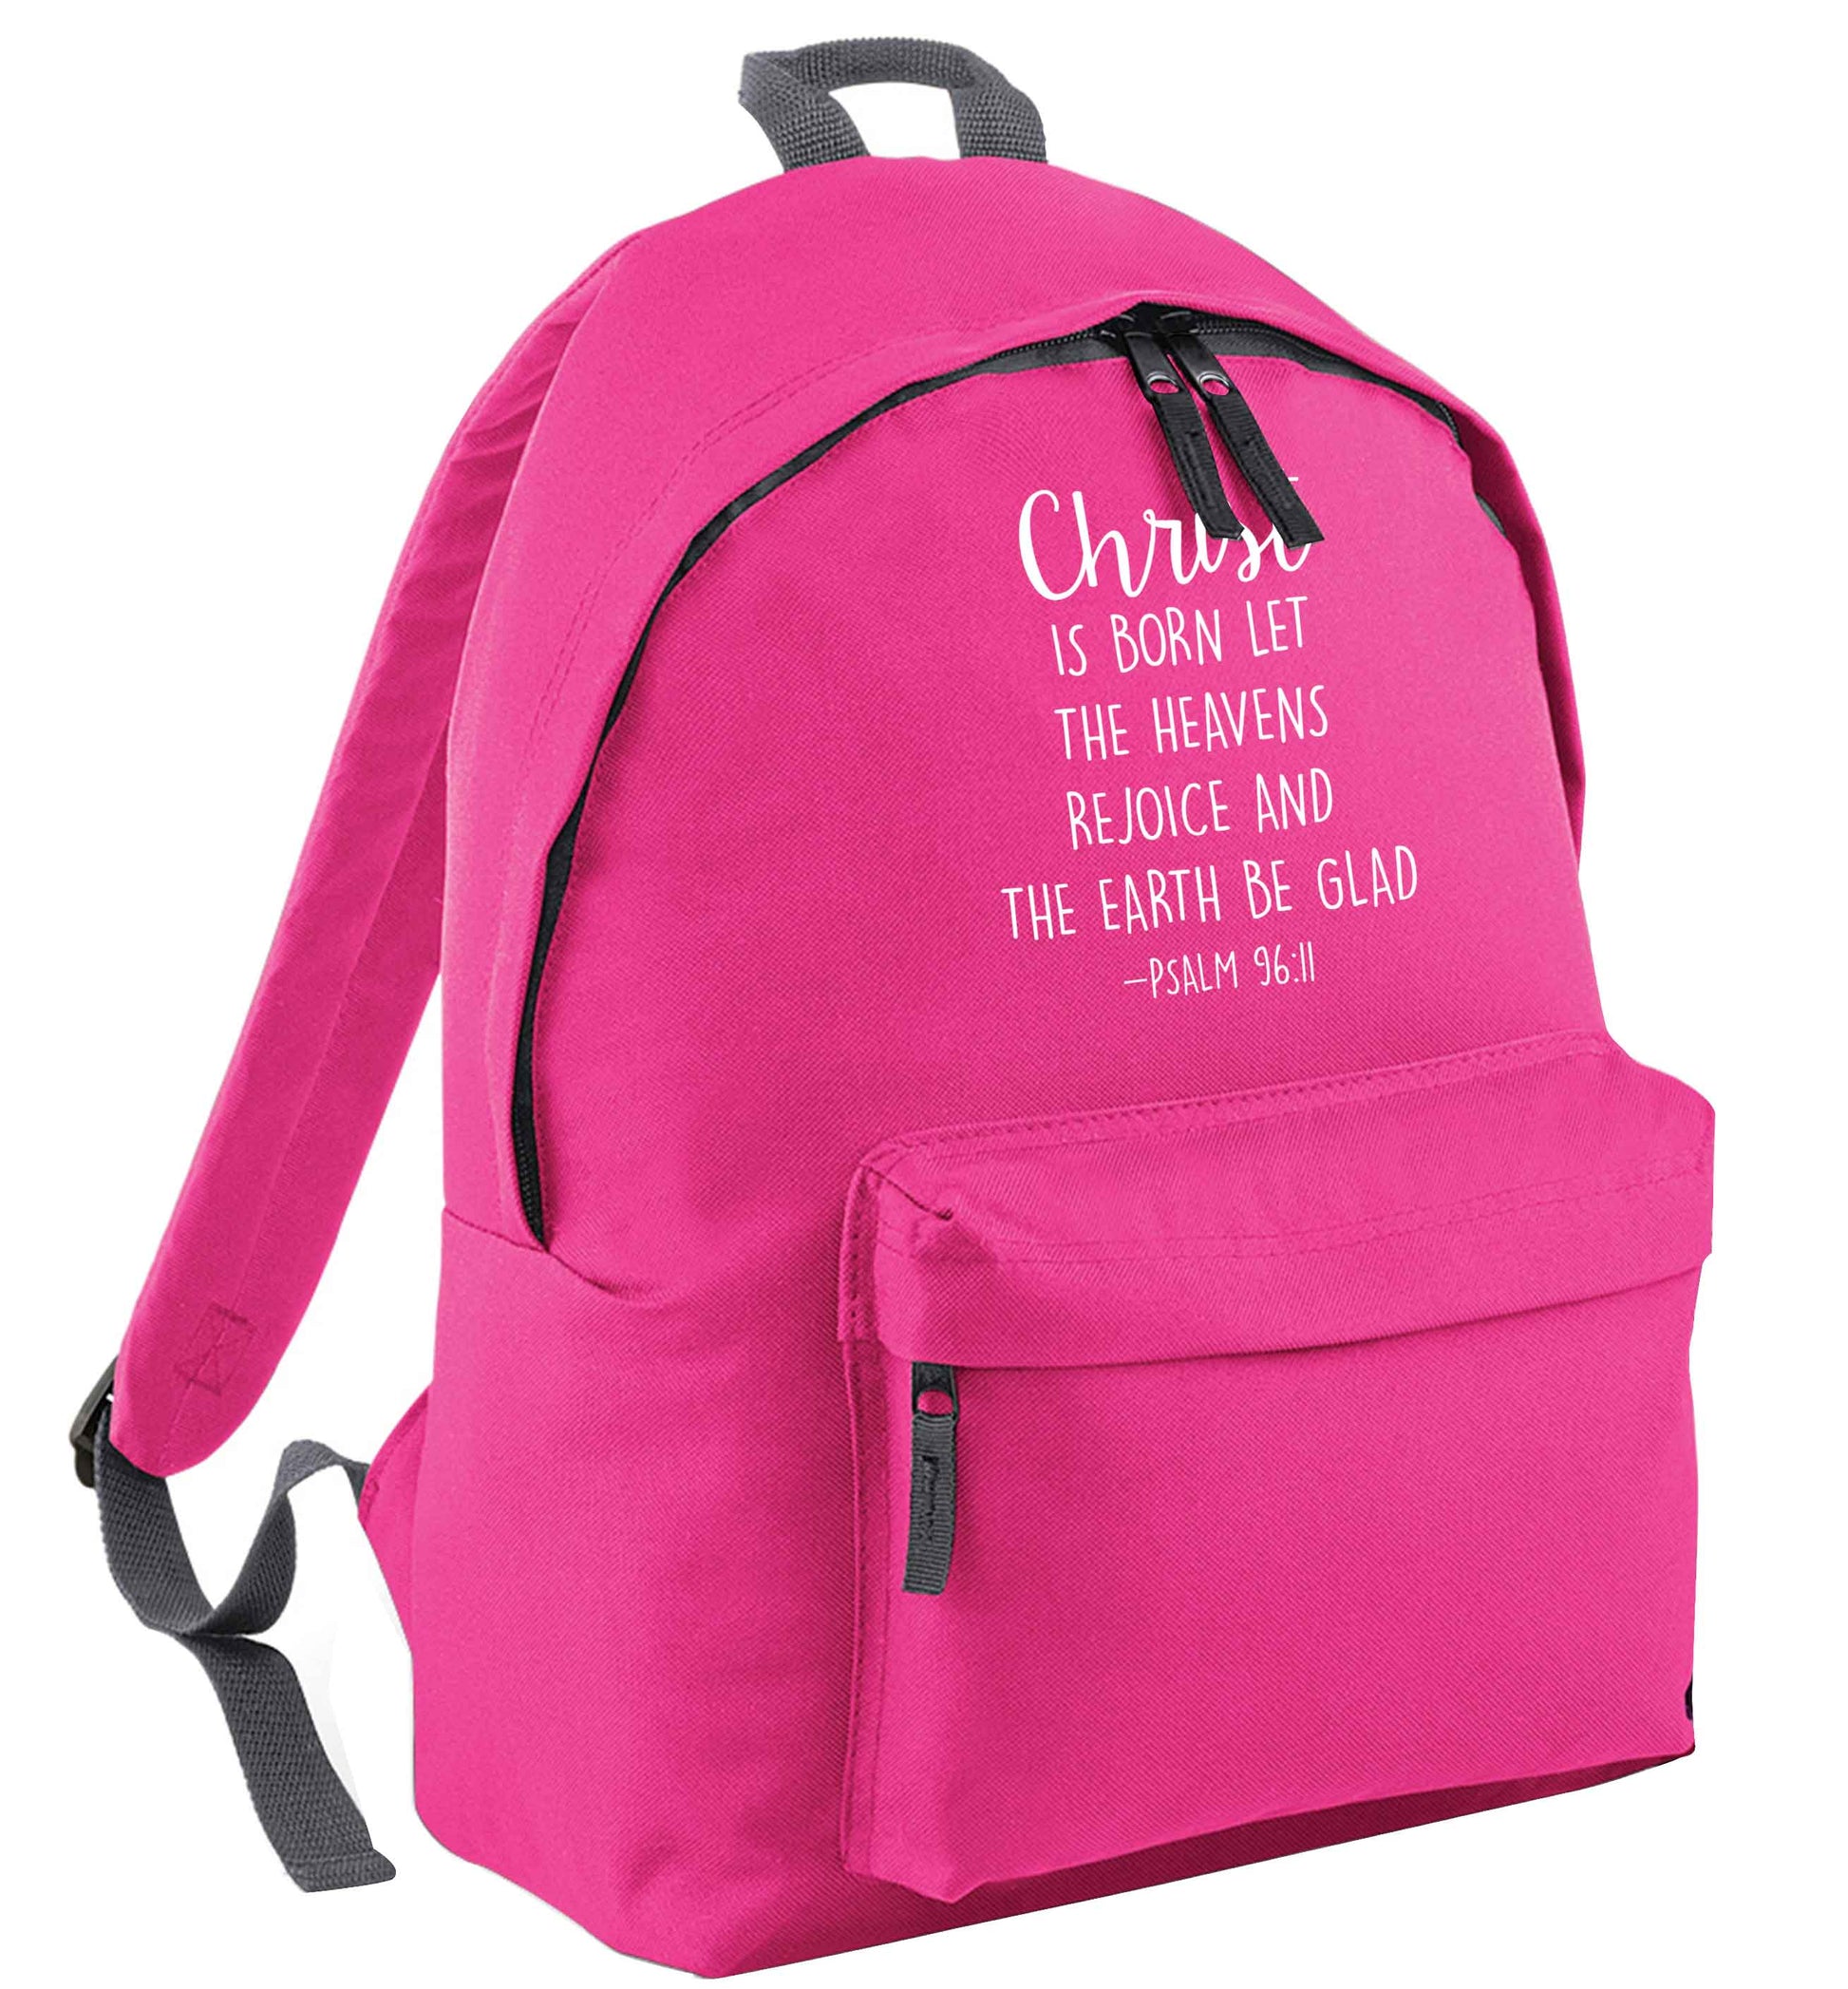 Christ is Born Psalm 96:11 pink adults backpack